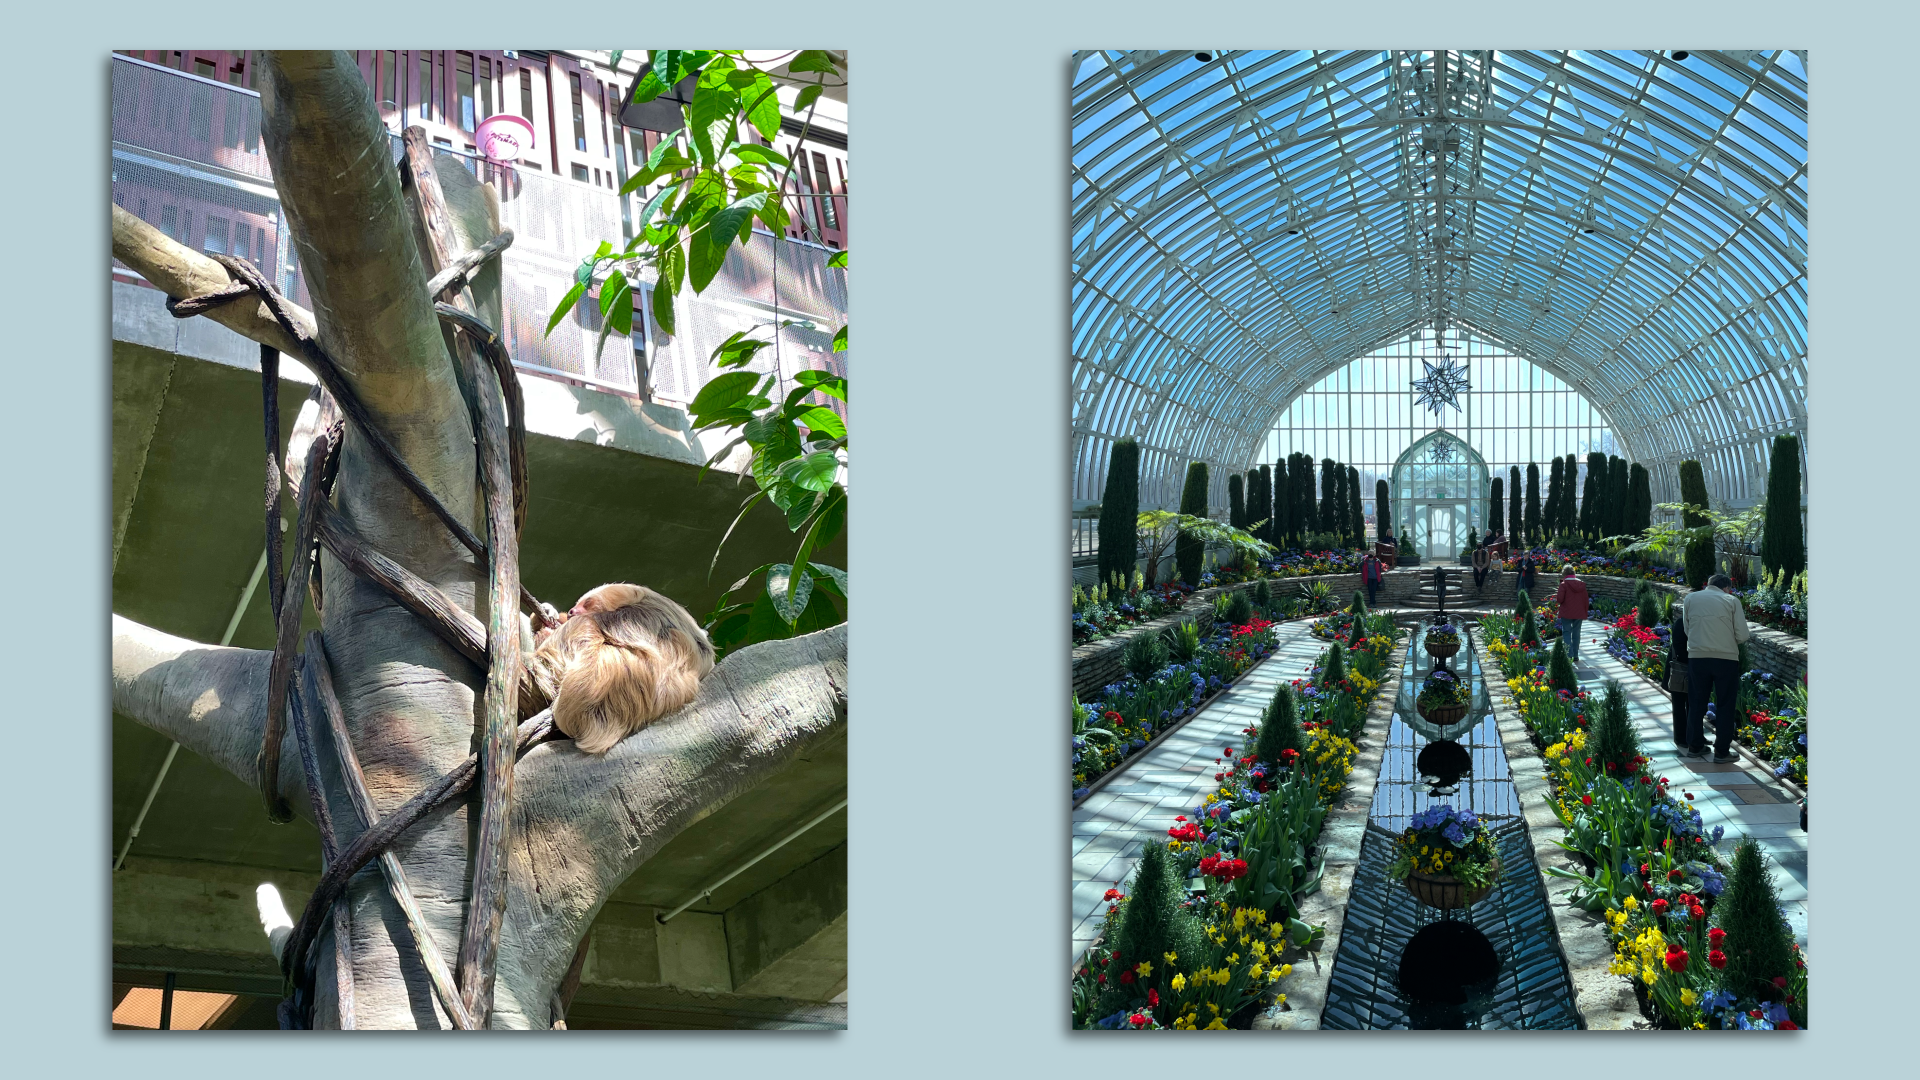 A sloth in a tree and a large glass conservatory filled with flowers.